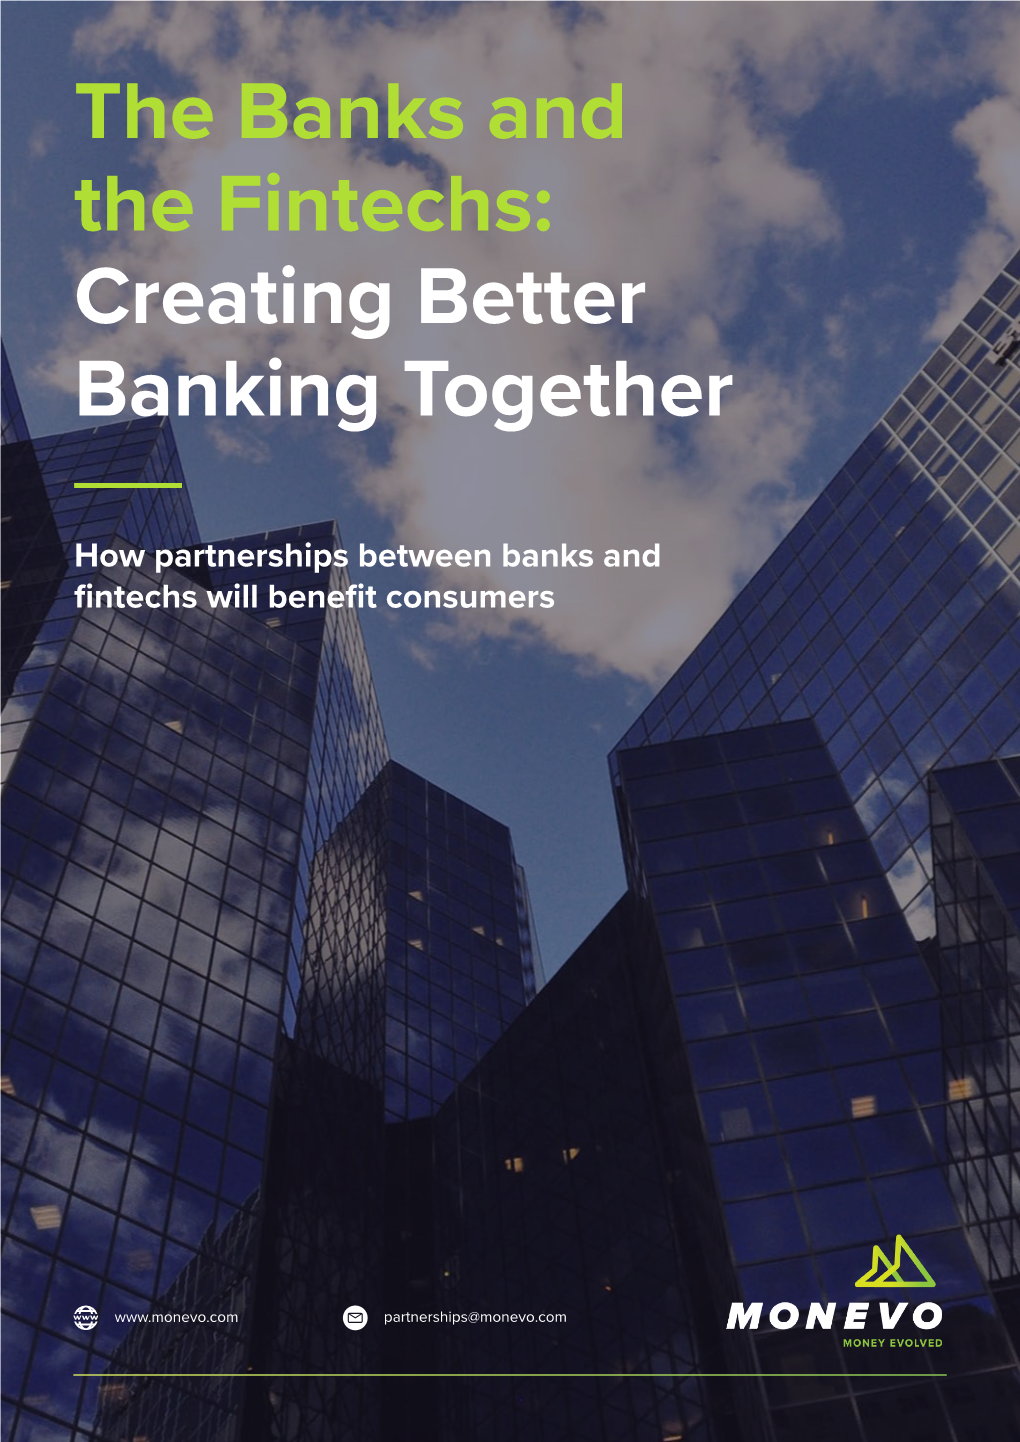 The Banks and the Fintechs: Creating Better Banking Together